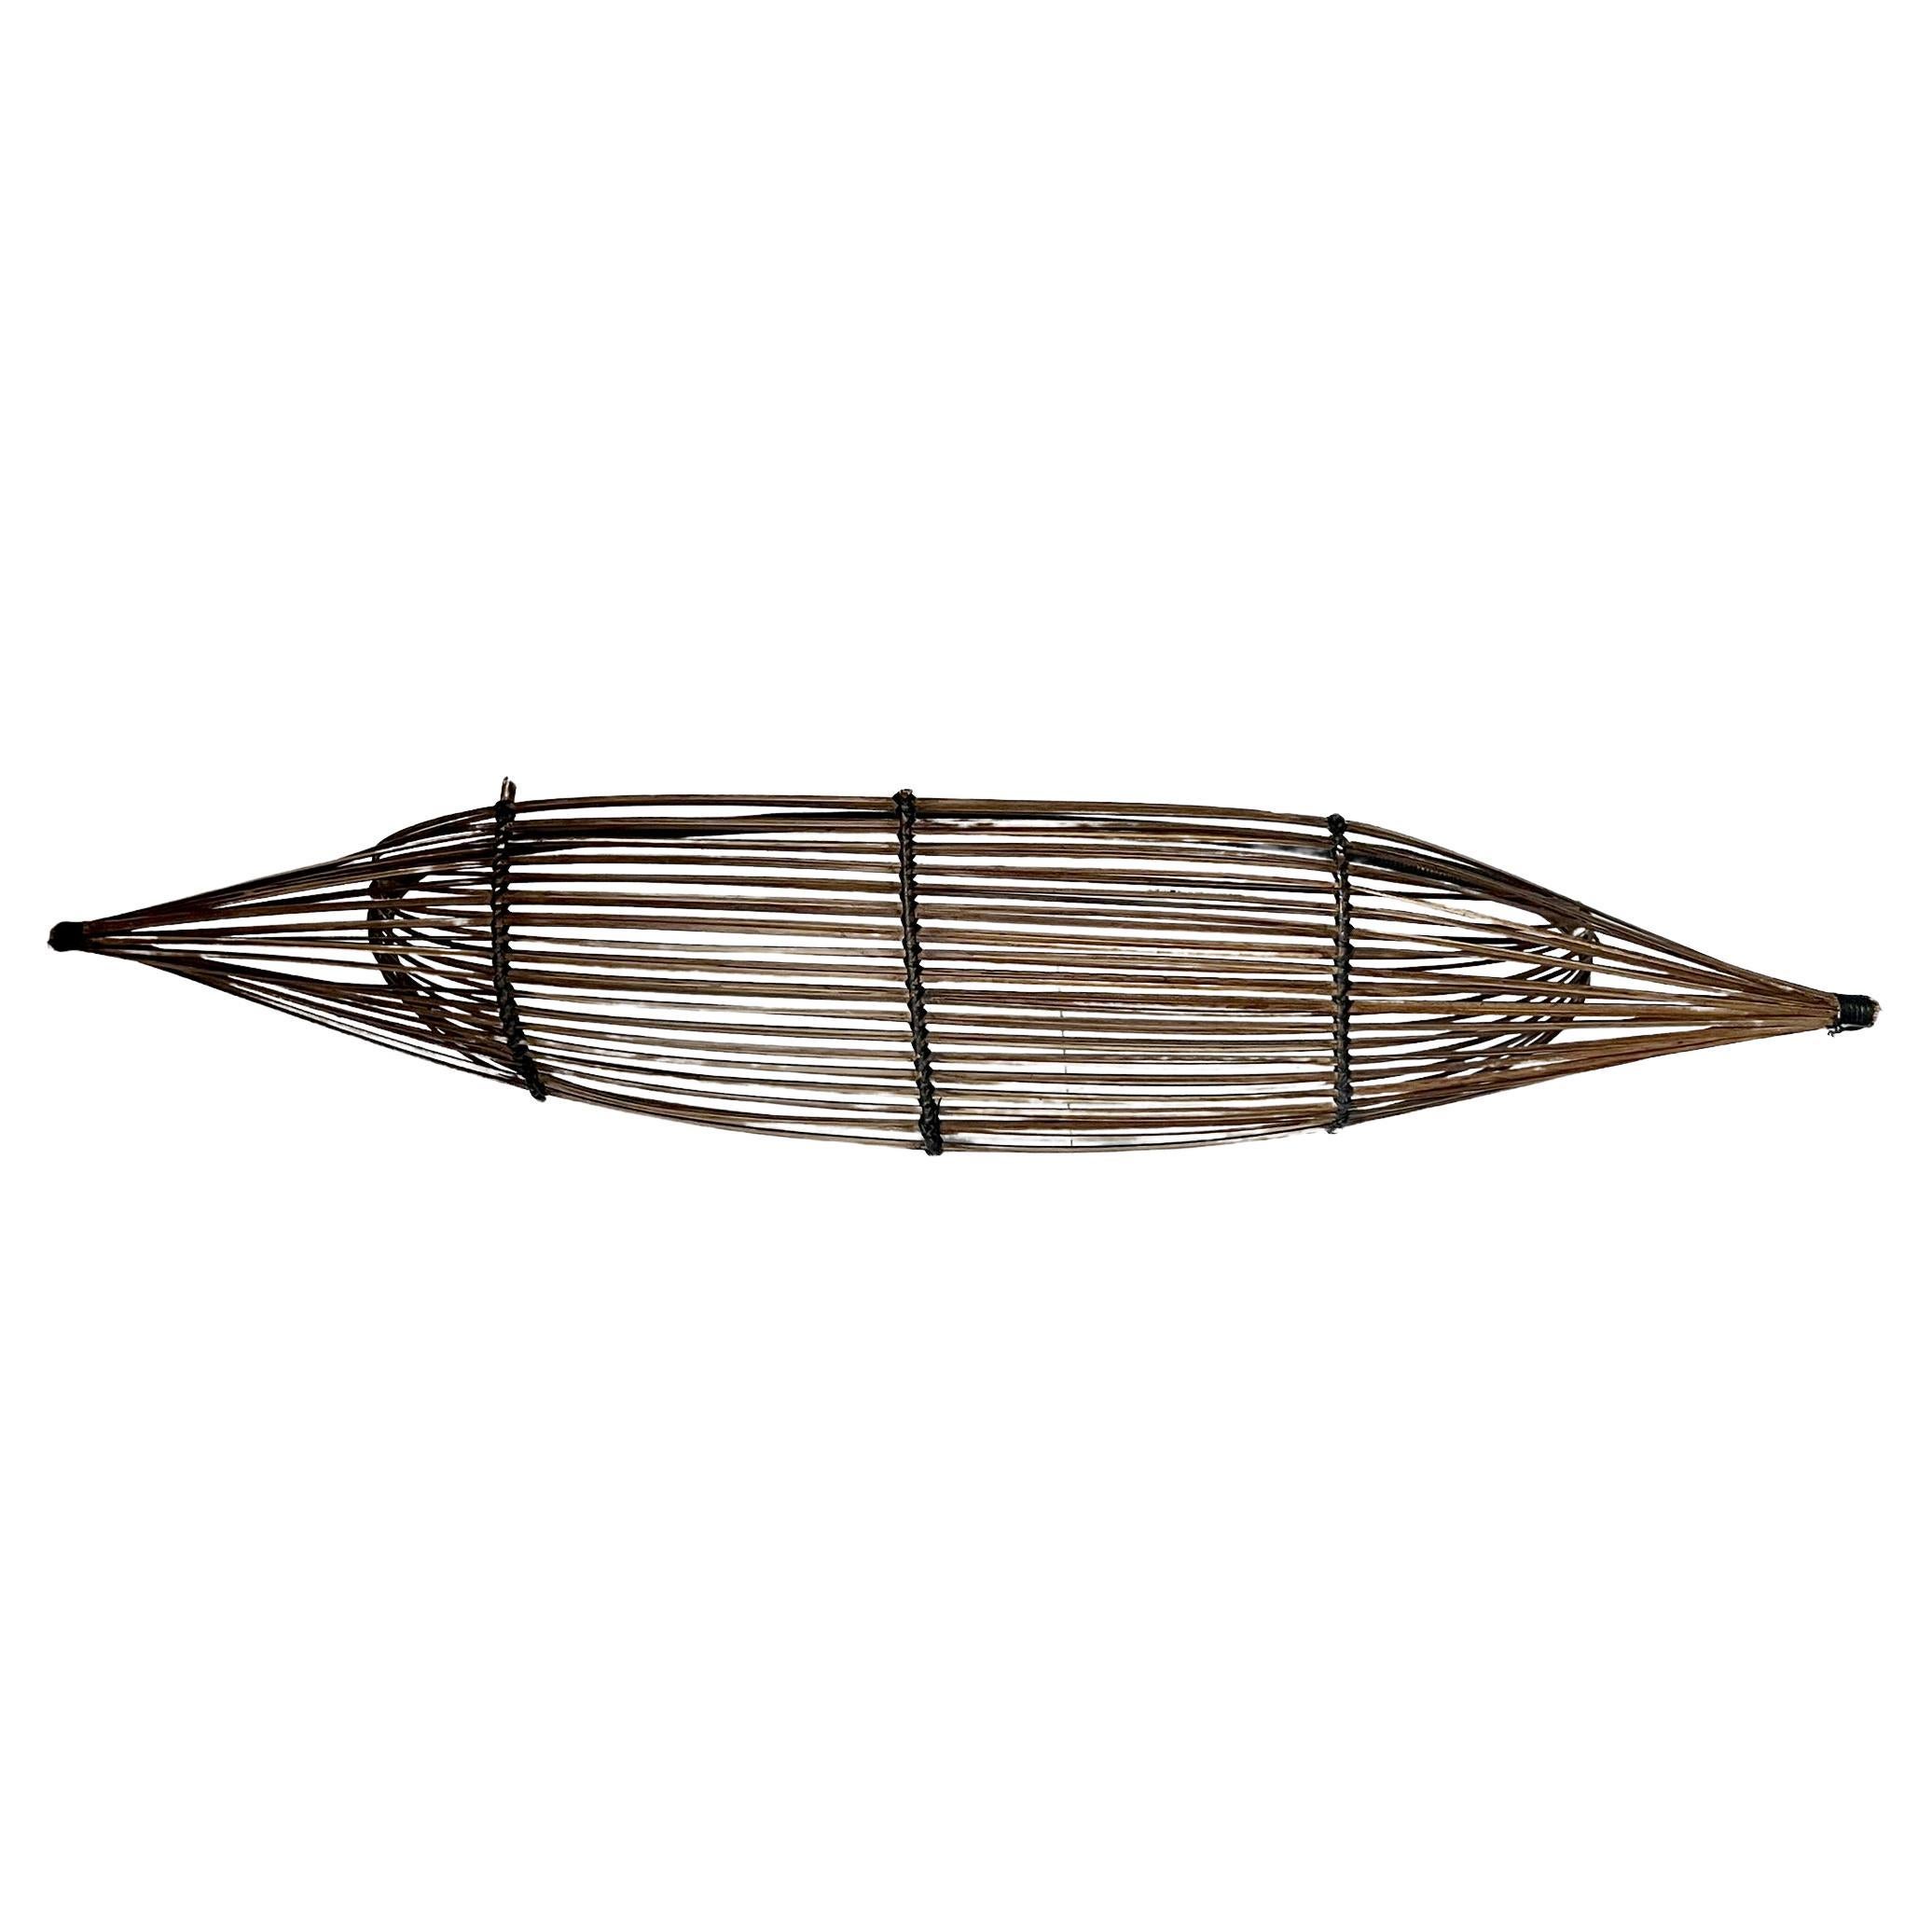 Asian Modern Handmade Willow and Cane Canoe Basket with Handle im Zustand „Gut“ im Angebot in Palm Springs, CA